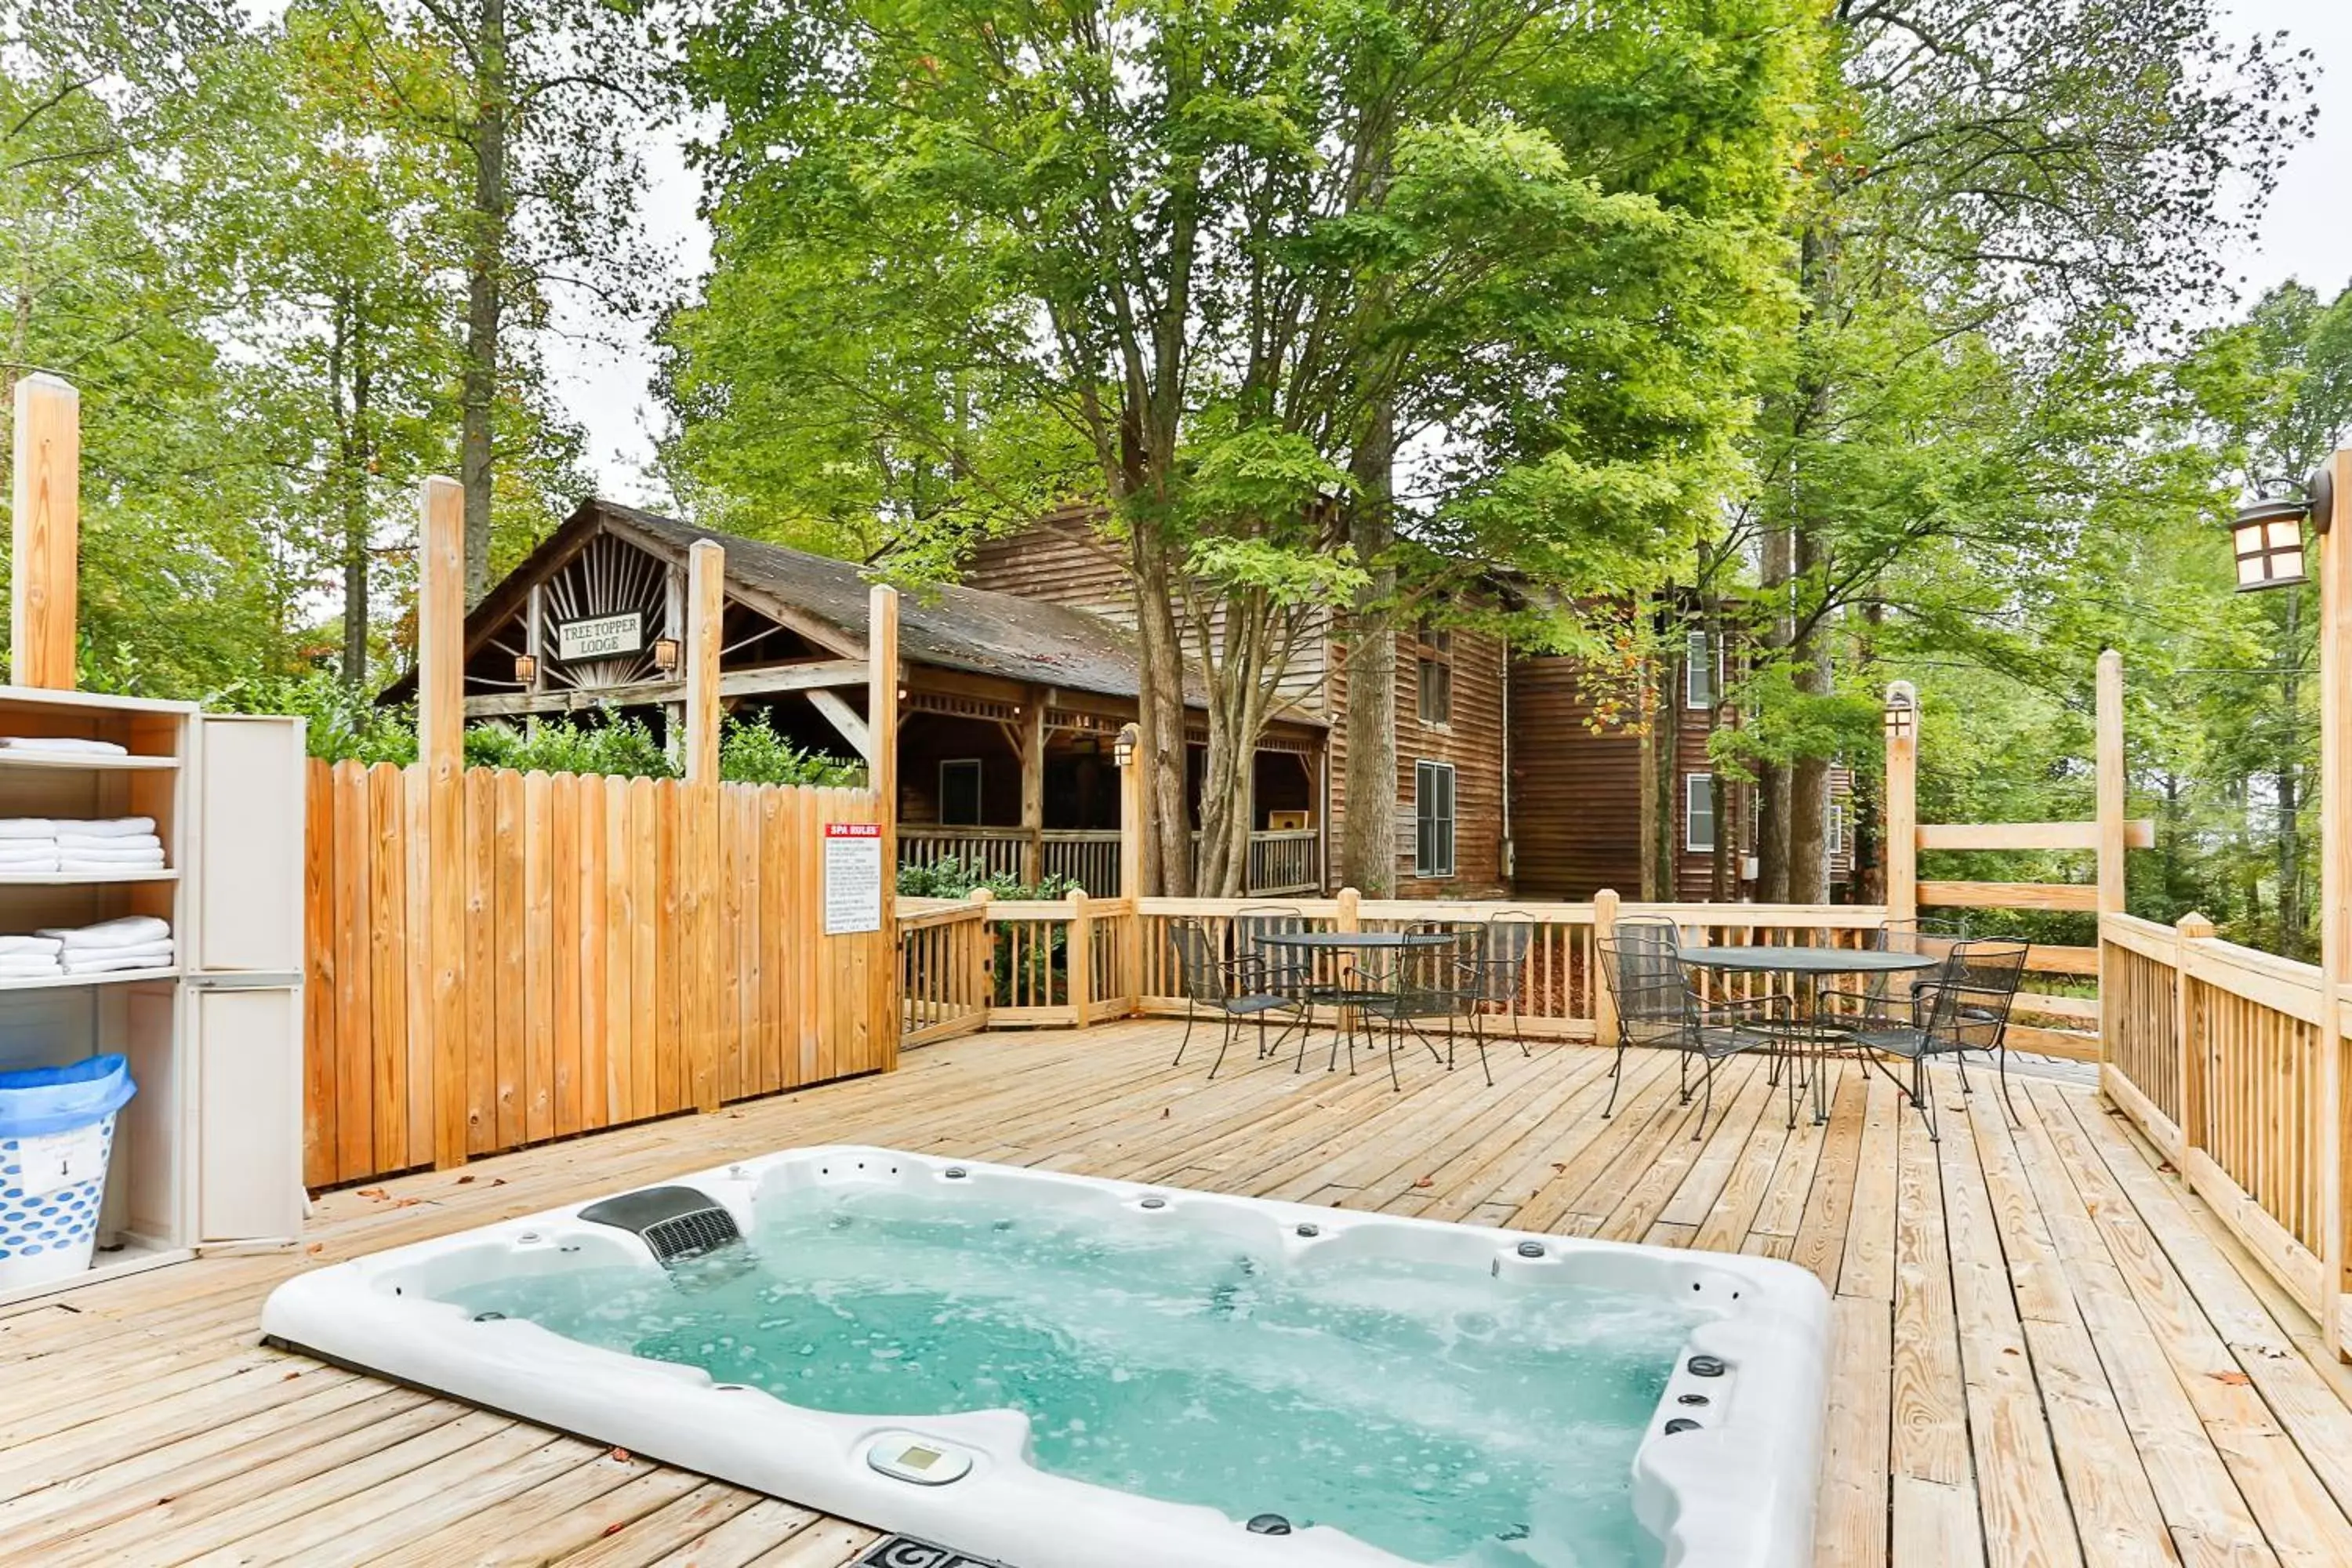 Hot Tub, Swimming Pool in Forrest Hills Mountain Resort